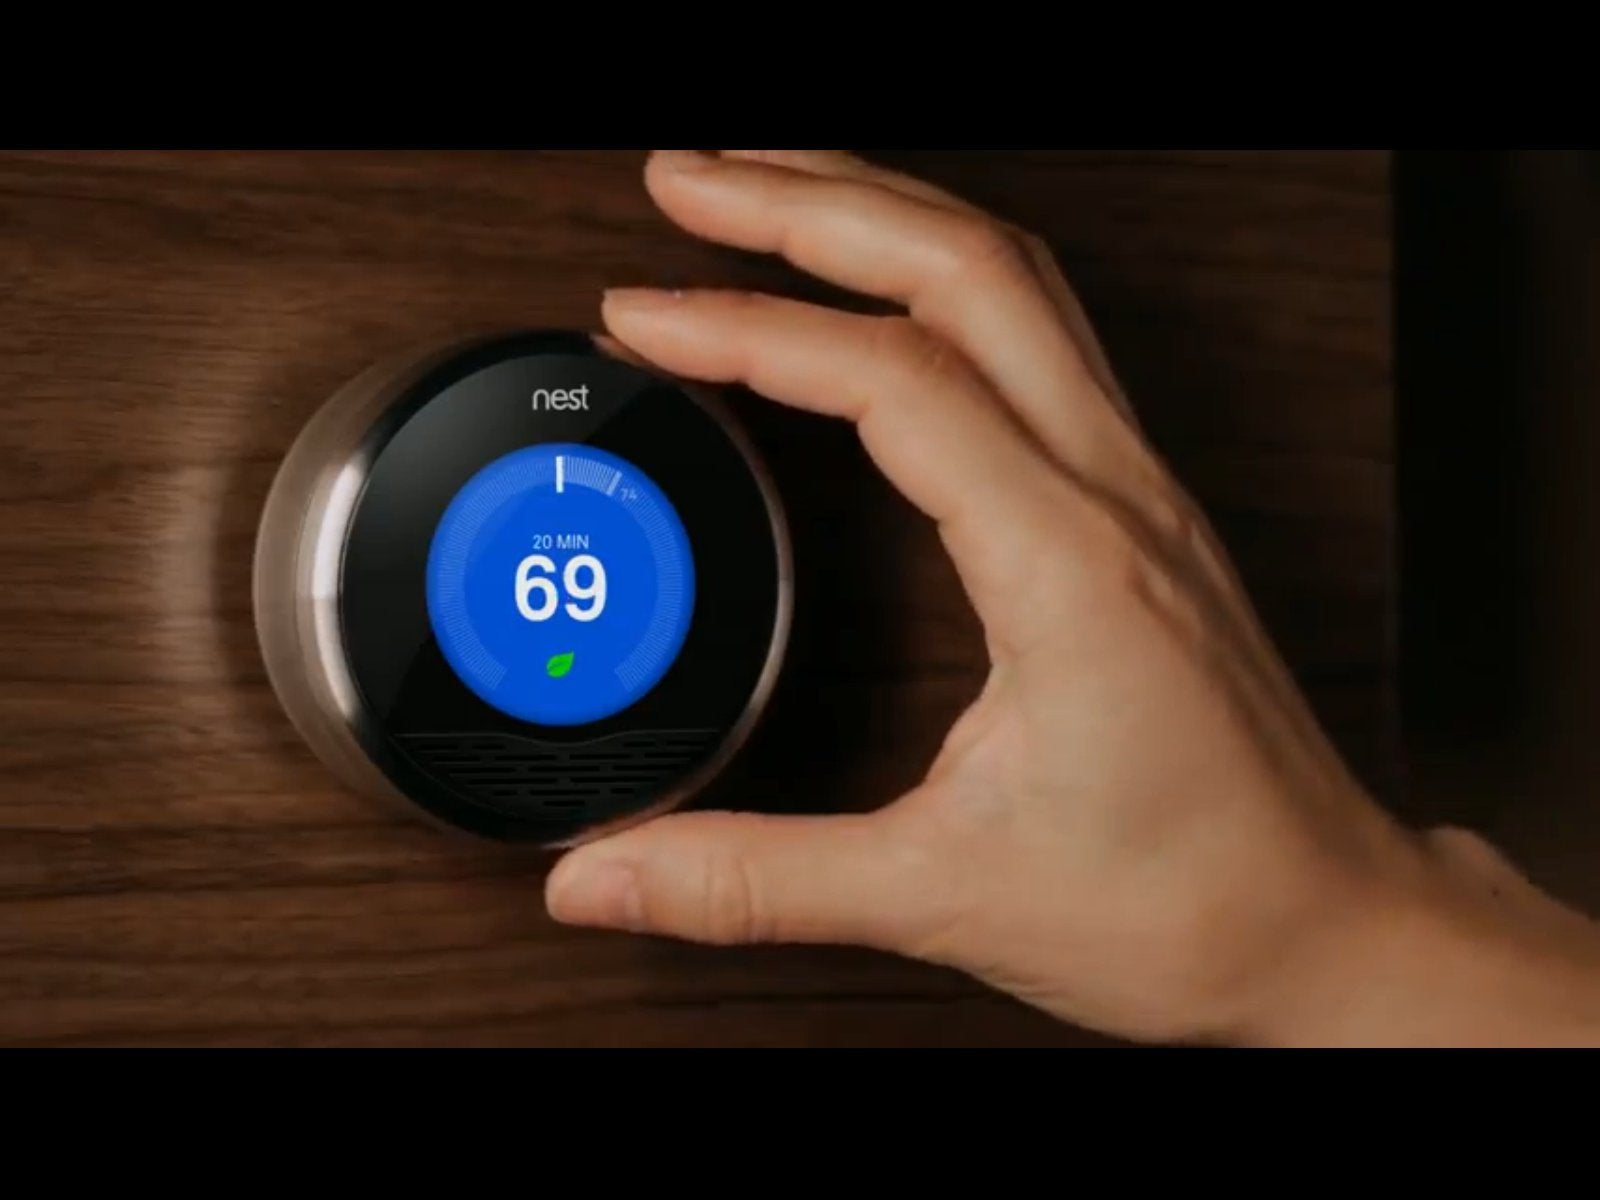 Nest Lab's eponymous thermostat. The internet-connected device tracks users habits and adjusts its daily schedule accordingly.